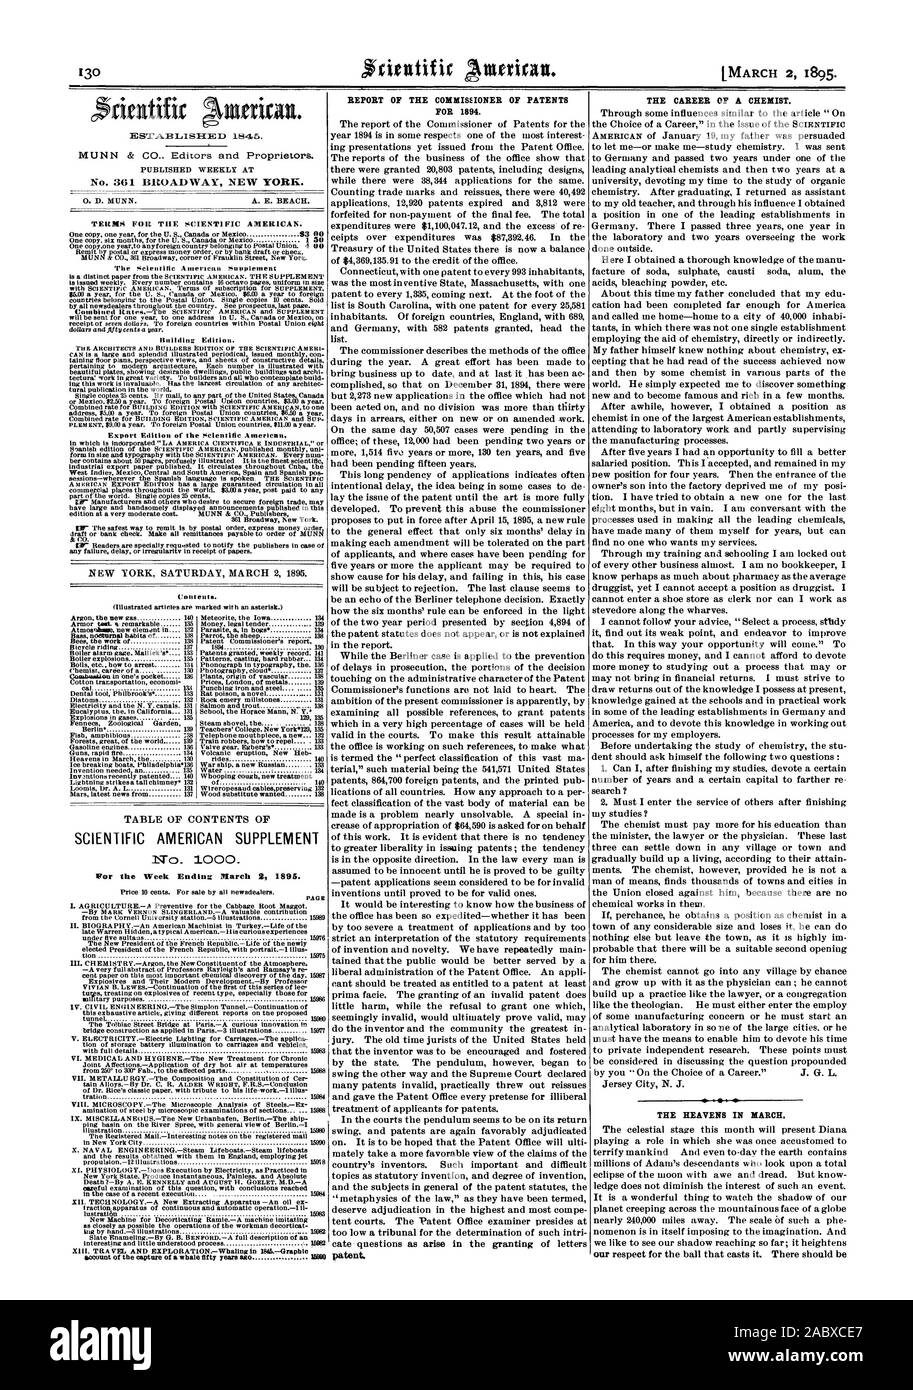 PUBLISHED WEEKLY AT 0. D. MUNN. A. E. BEACH. TERMS FOIL THE SCIENTIFIC AMERICAN. Gunflint: Edition. Export Edition of the Scientific American. Contents. SCIENTIFIC AMERICAN SUPPLEMENT No. 1000. For the Week Ending: March 2 1895. careful examination of this question with conclusions reached in the case of a recent execution  15991 XII. TECHNOLOGYA New Extracting Apparatus —An oil ex REPORT OF THE COMMISEIONER OF PATENTS FOR 1894. THE CAREER OF A CHEMIST. THE HEAVENS IN MARCH. Explosions in gases  135 Fennecs Zoological Garden Berlins 139 Whooping cough new treatment, 1895-03-02 Stock Photo